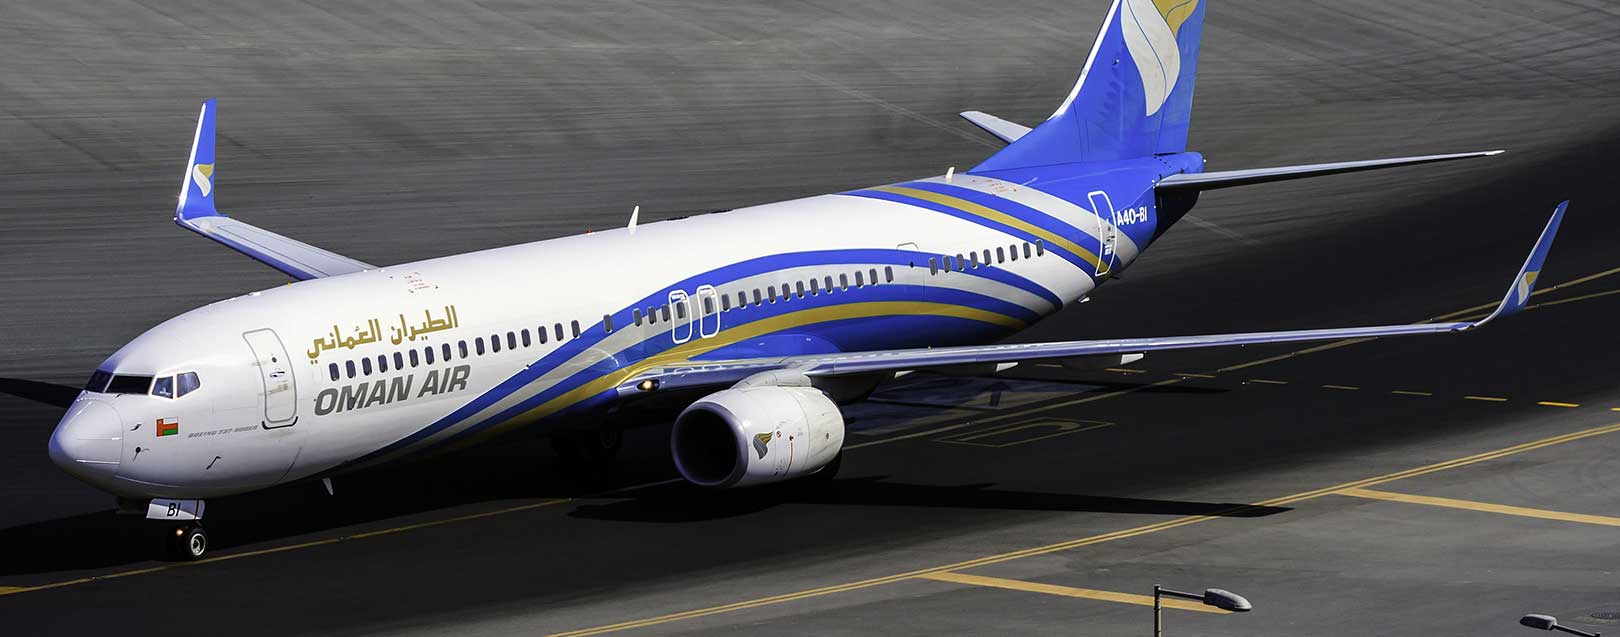 India will consider an open sky agreement for flights within 5,000 km: Oman Air